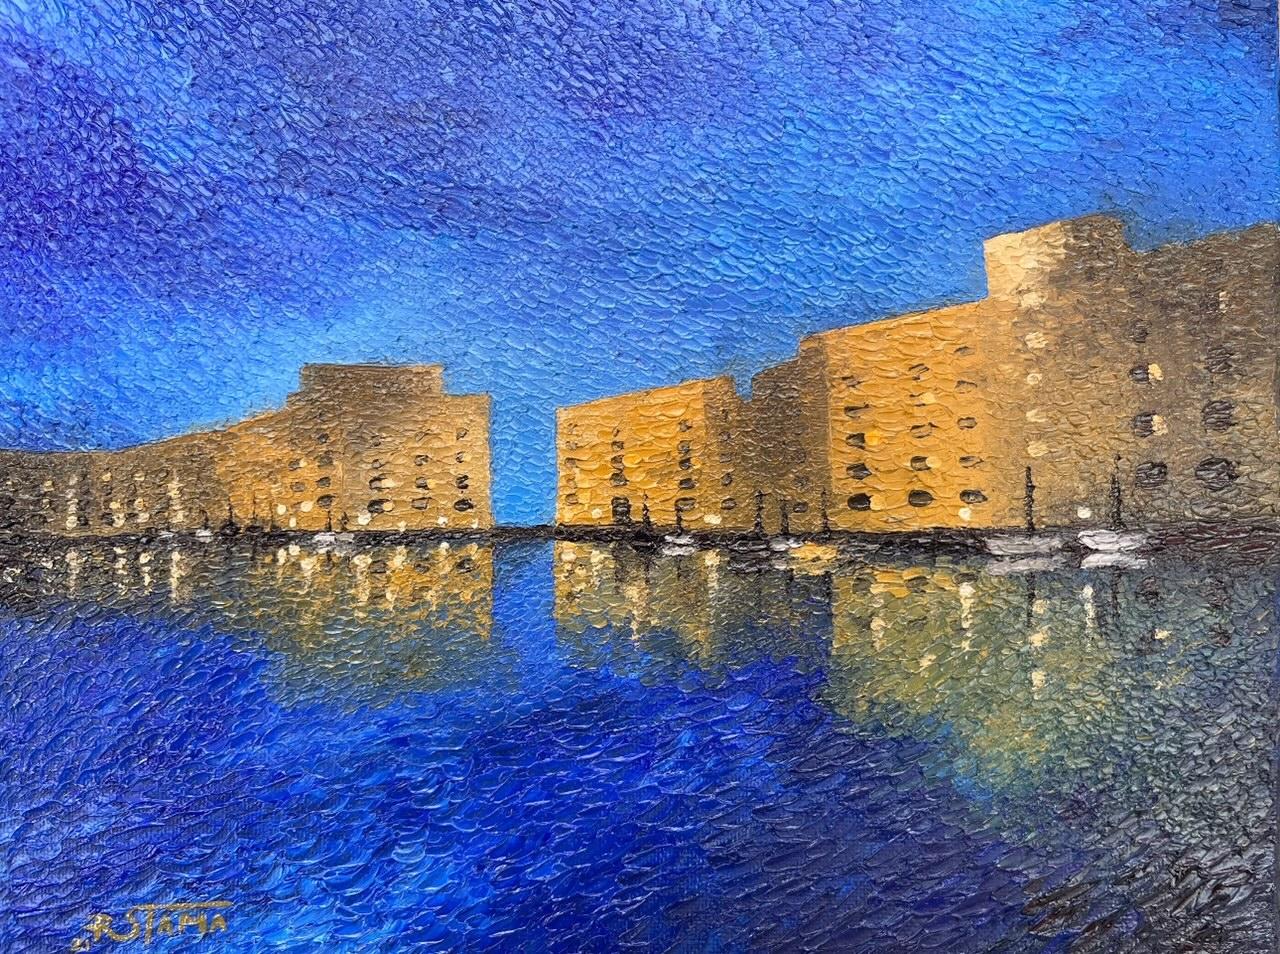 Let the moonlit magic of Malaga captivate you through this enchanting Petrino style oil painting.The textured canvas boasts a myriad of blue shades that echo the serene Mediterranean nights, while the golden hues of the buildings lights outline a